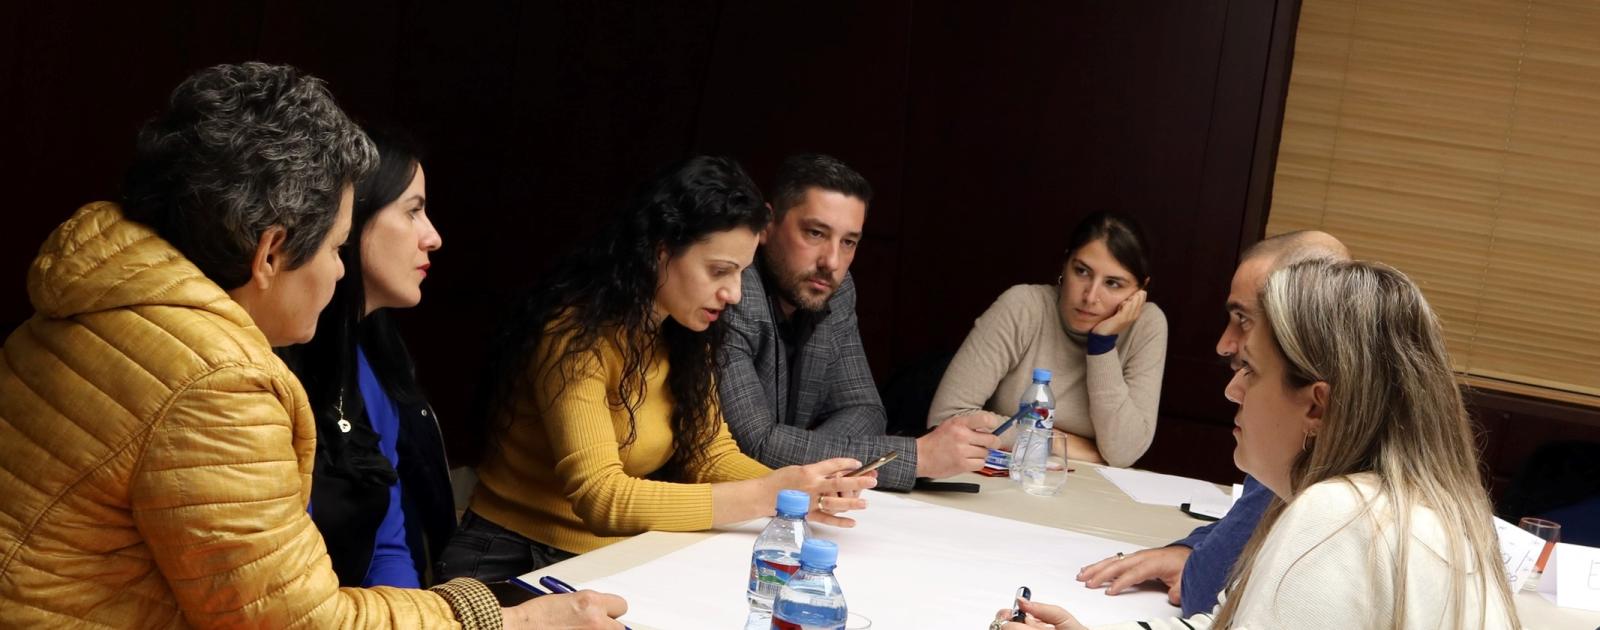 45 Frontline Professionals From Fier and Shkoder Were Trained on the Consequences of Child Sexual Abuse.